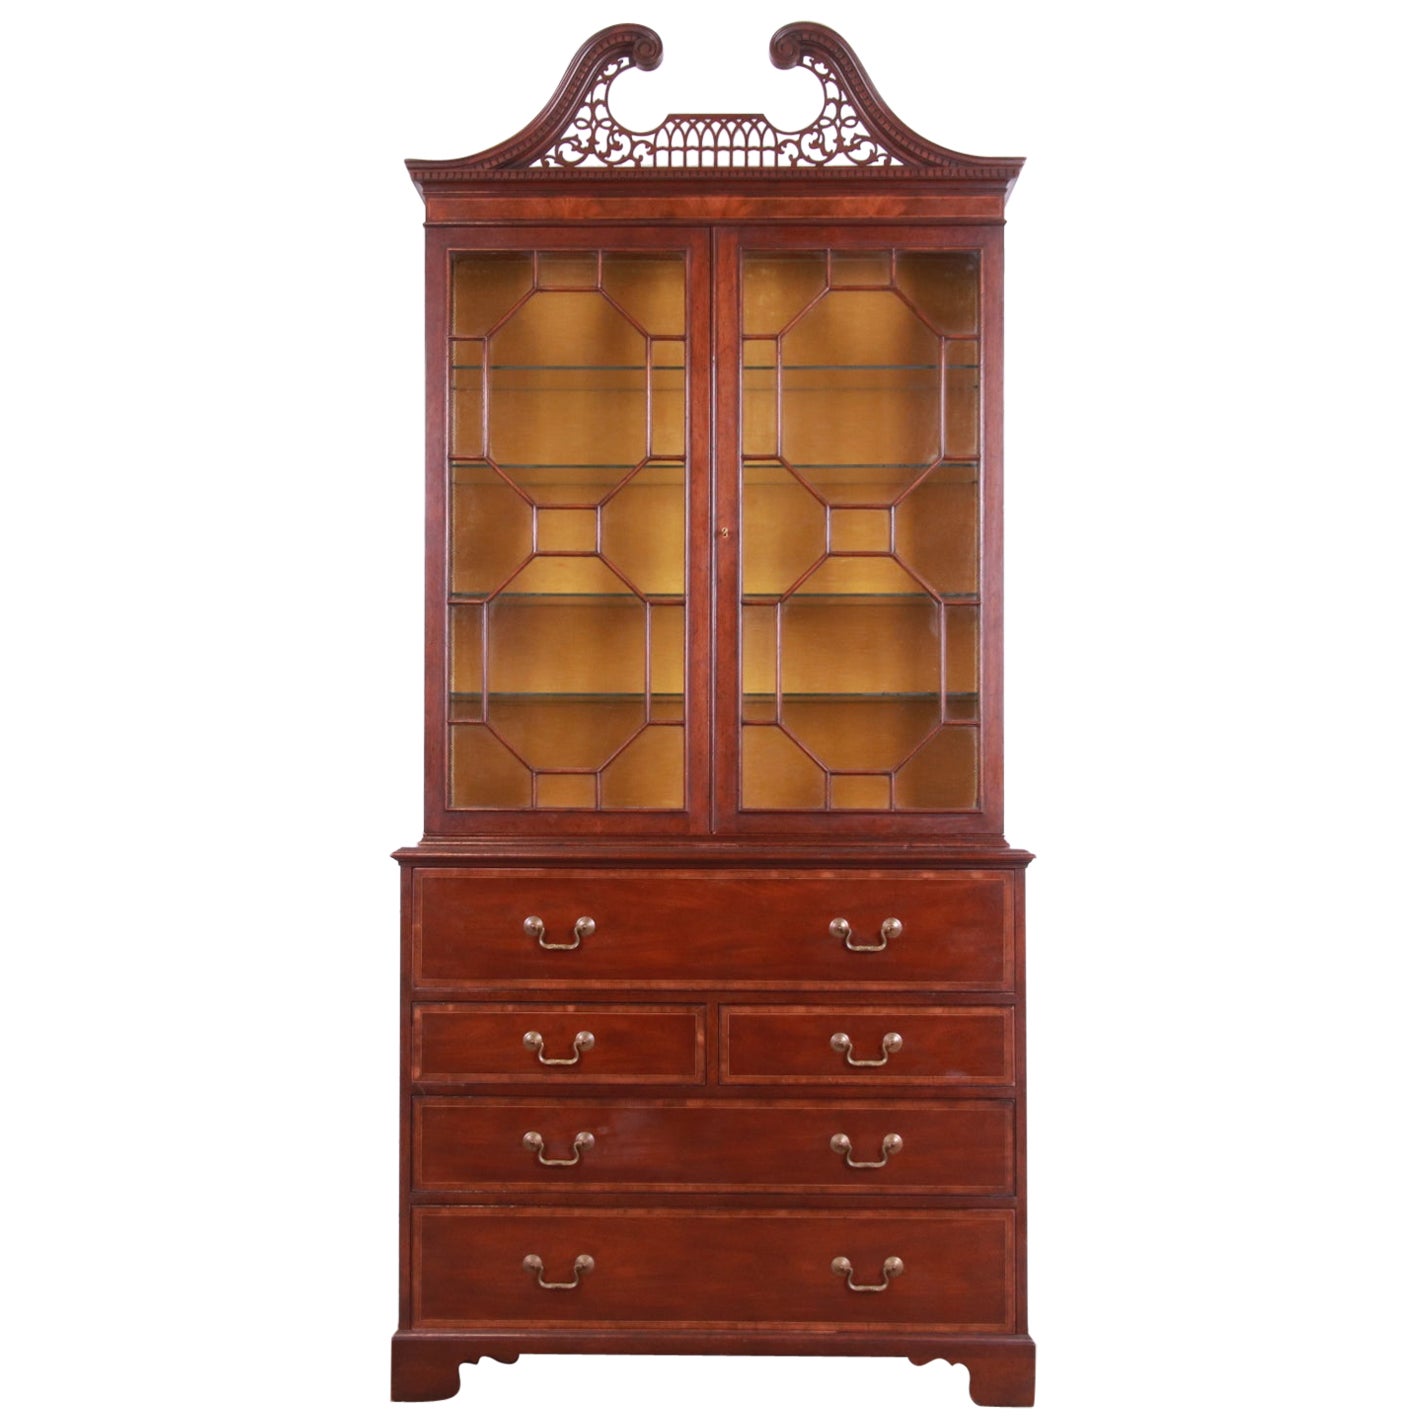 Baker Furniture Chippendale Carved Mahogany Secretary Desk with Bookcase Hutch